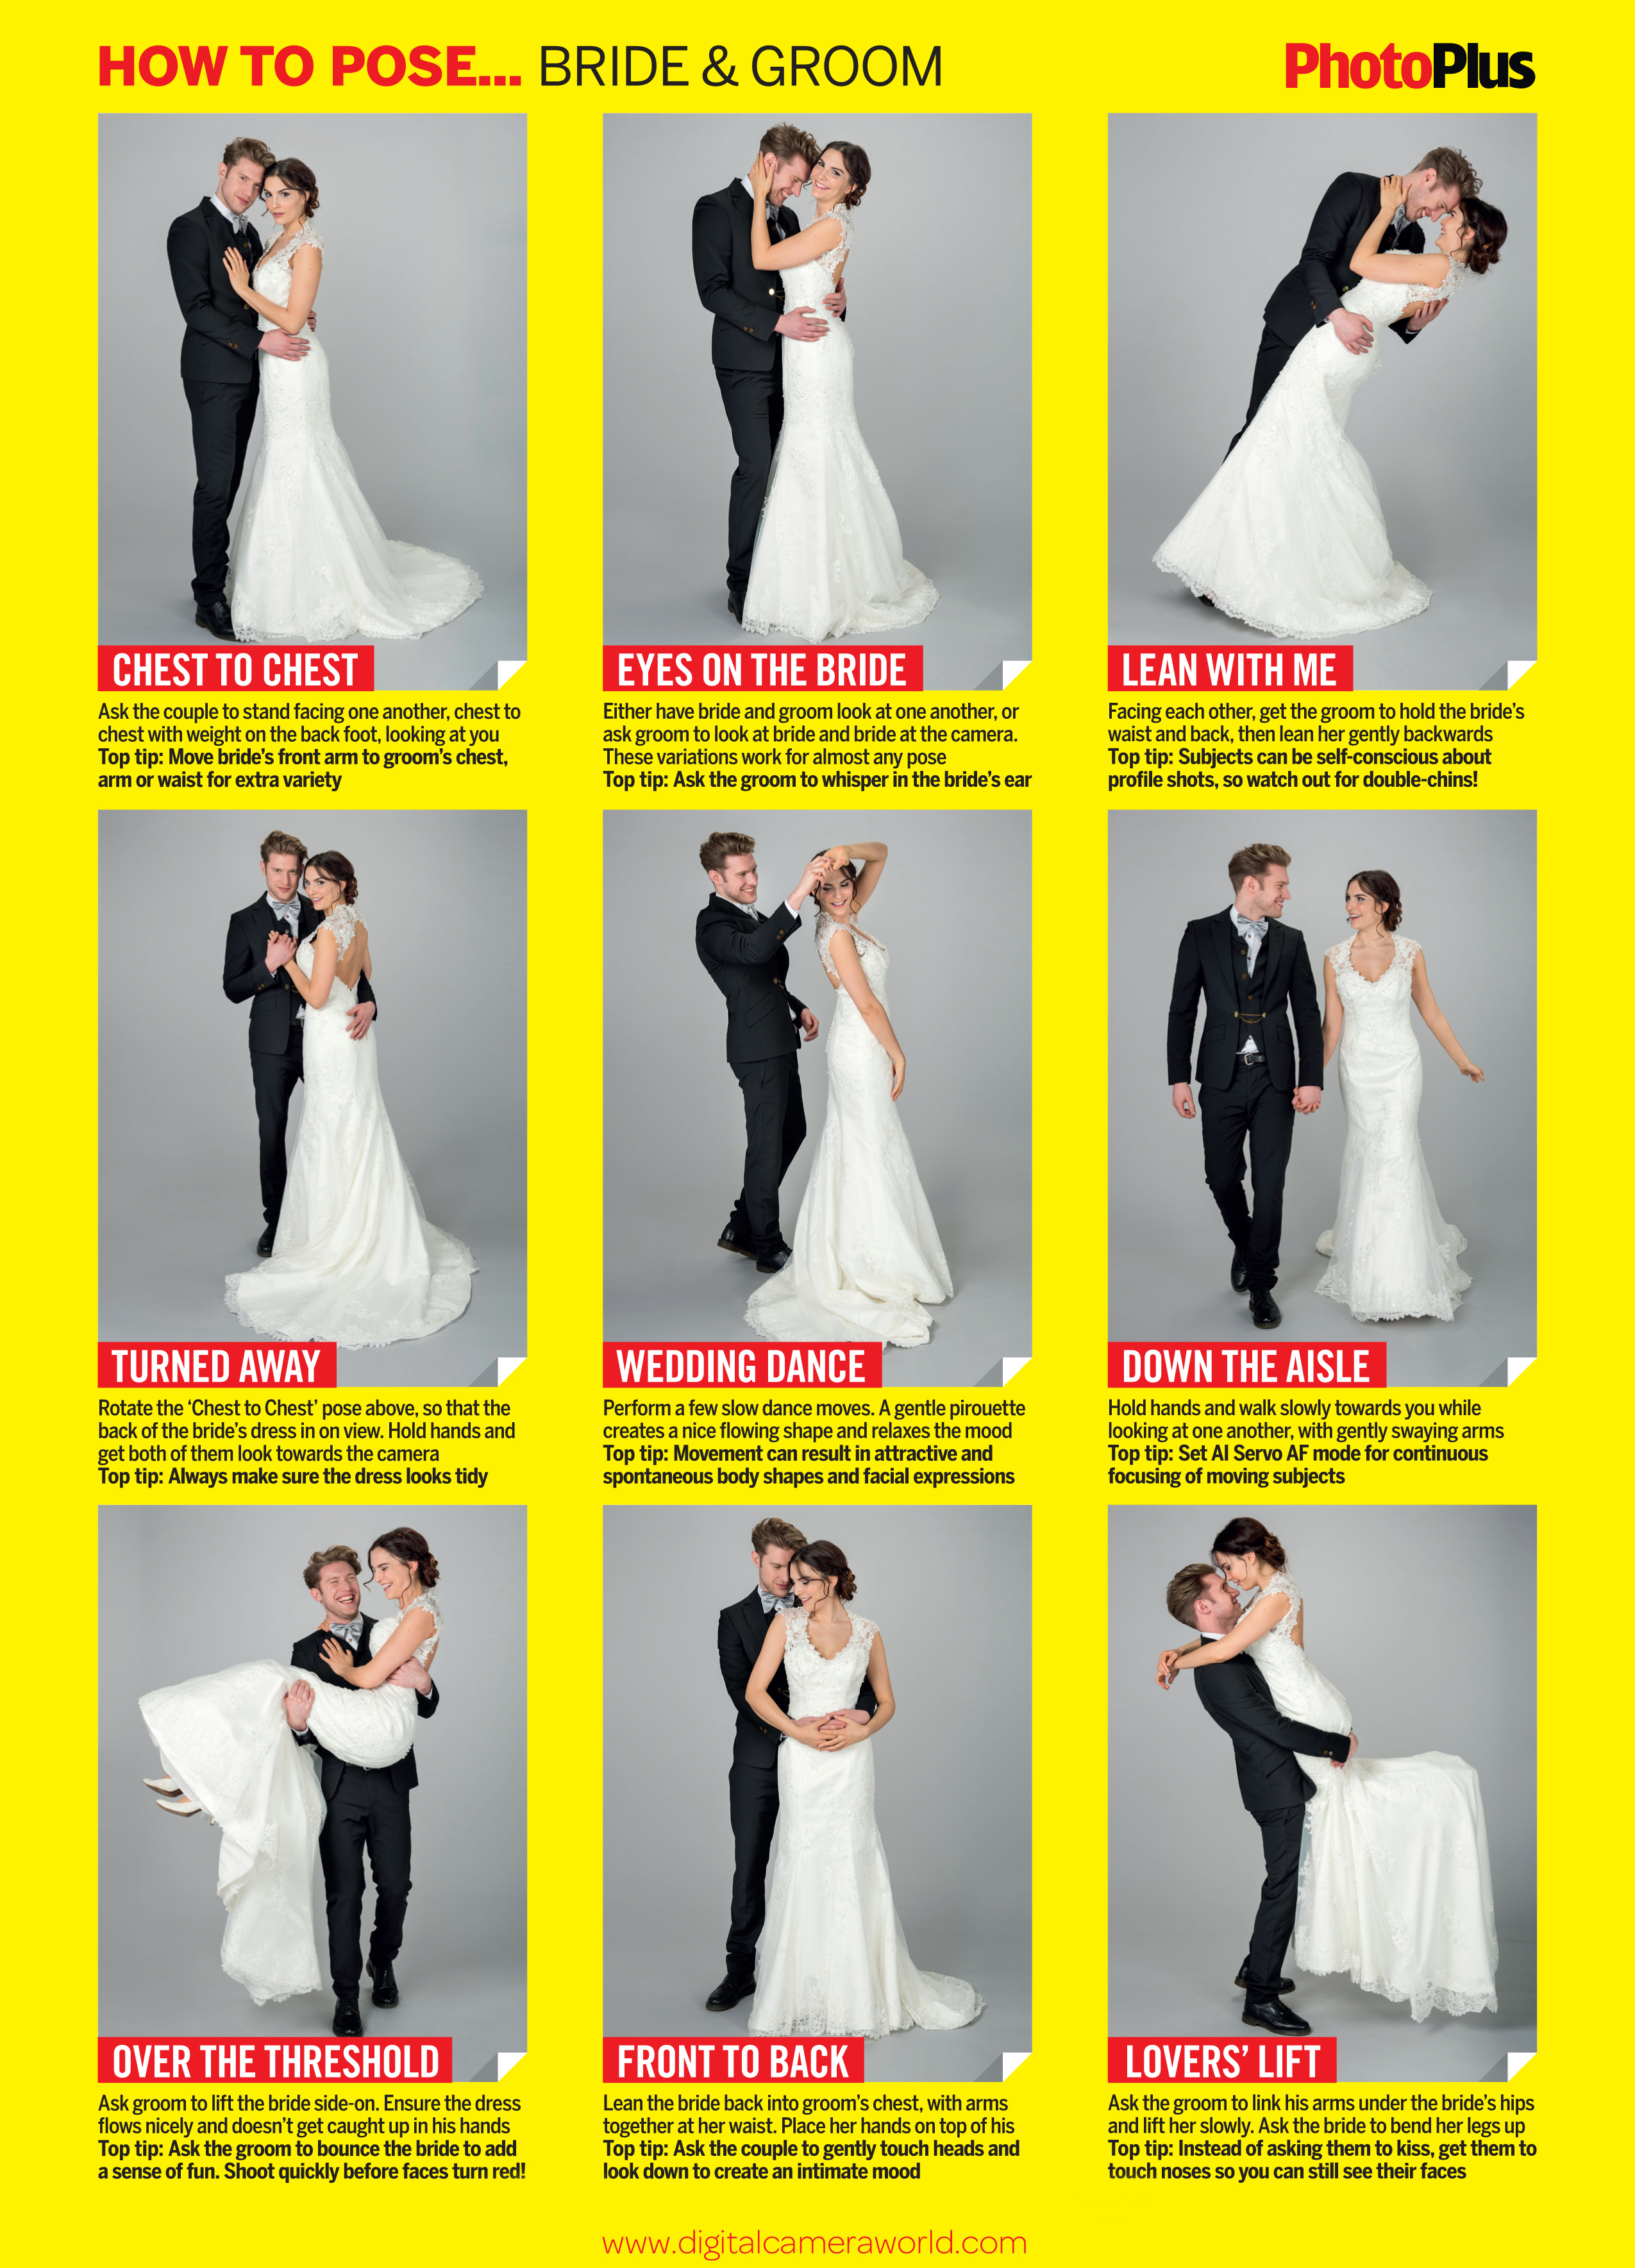 9 Posing Tips For Couples - Download A Free Cheat Sheet - Page 2 of 2